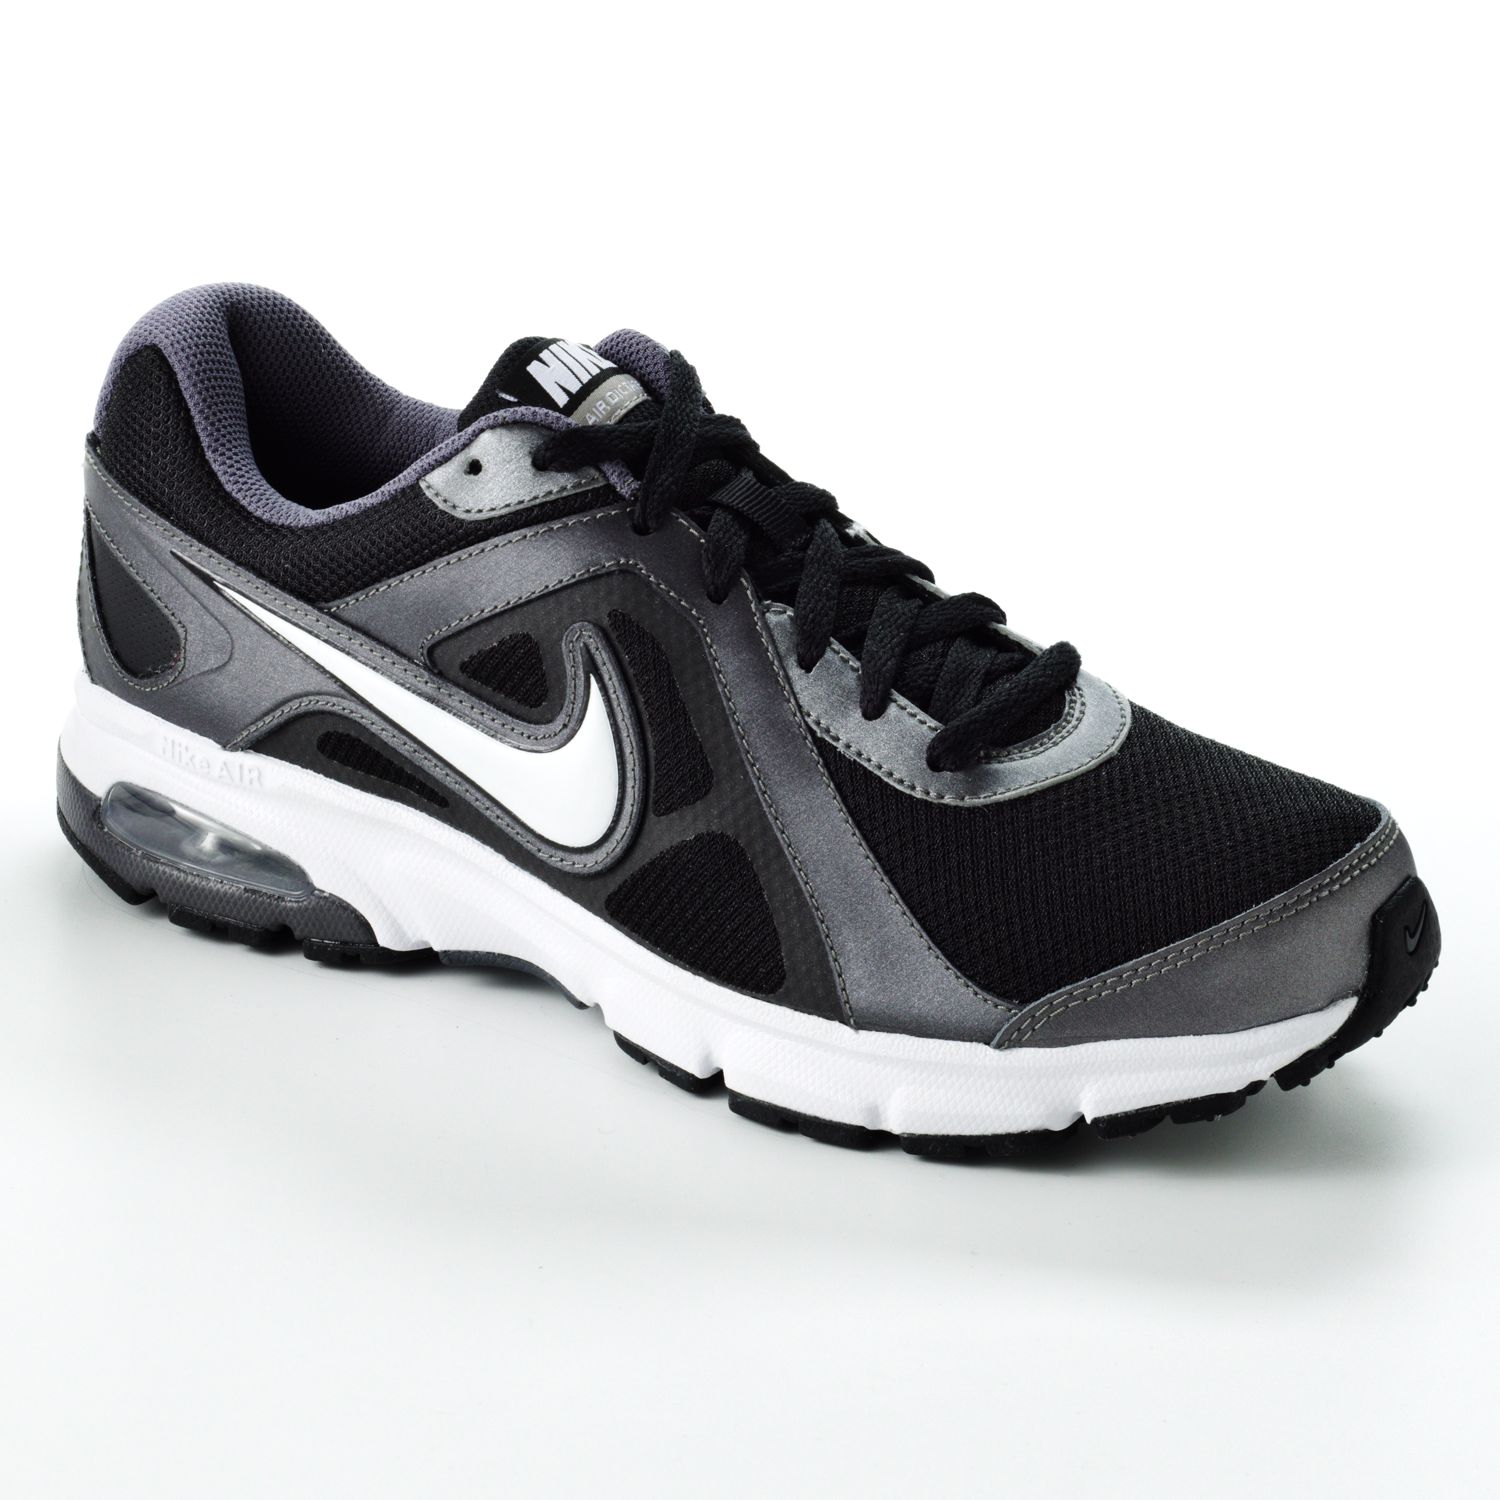 Nike Air Dictate 2 Running Shoes - Men